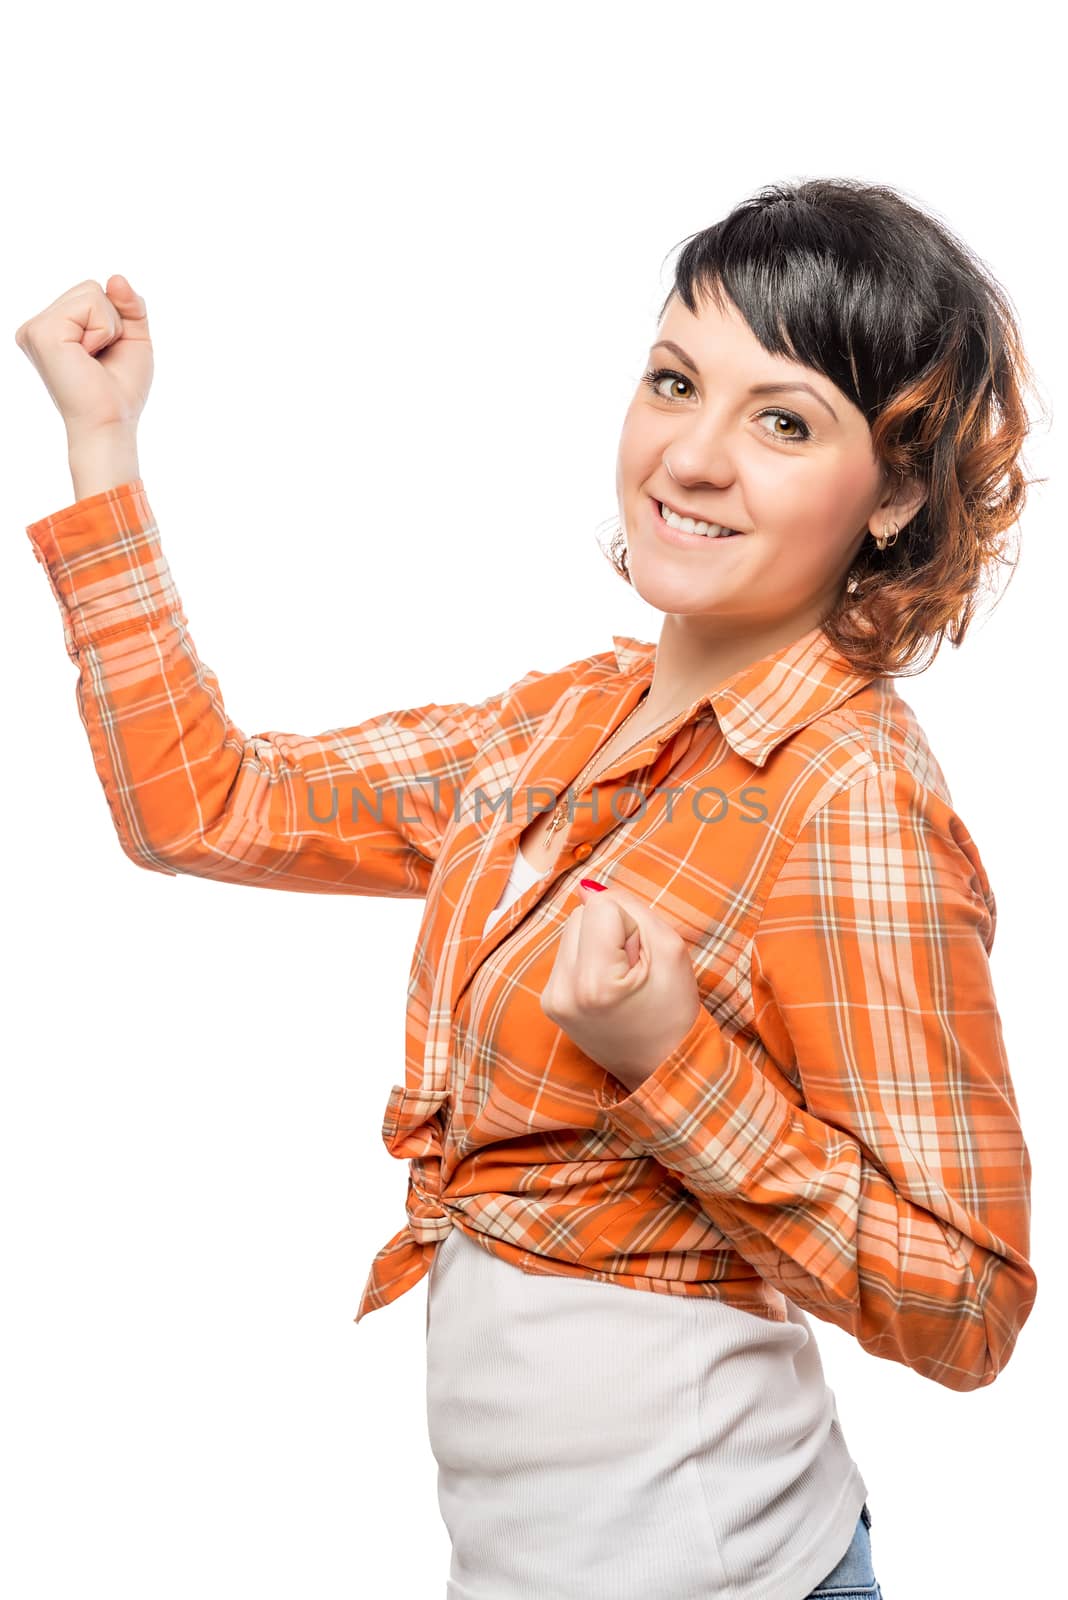 successful young woman showing a gesture with hands on a white background